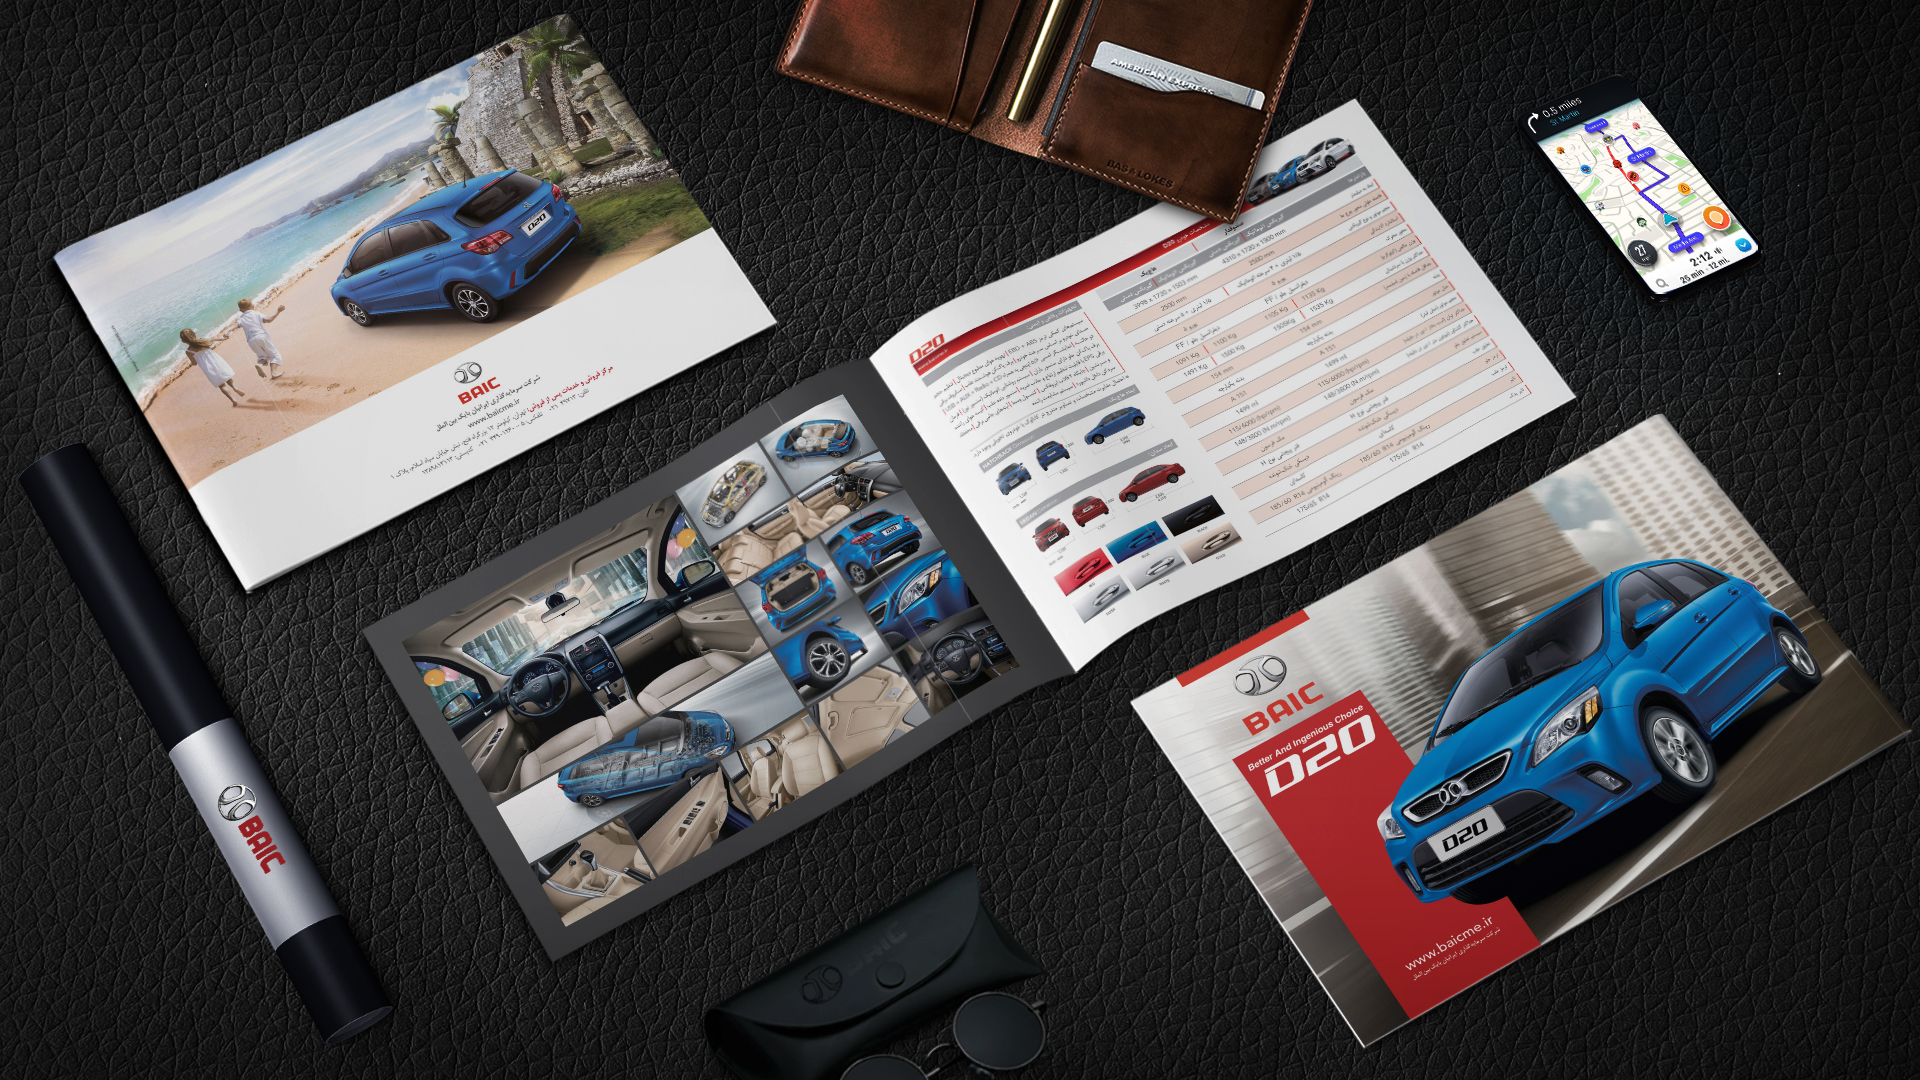 We designed an informative catalogue for the products 